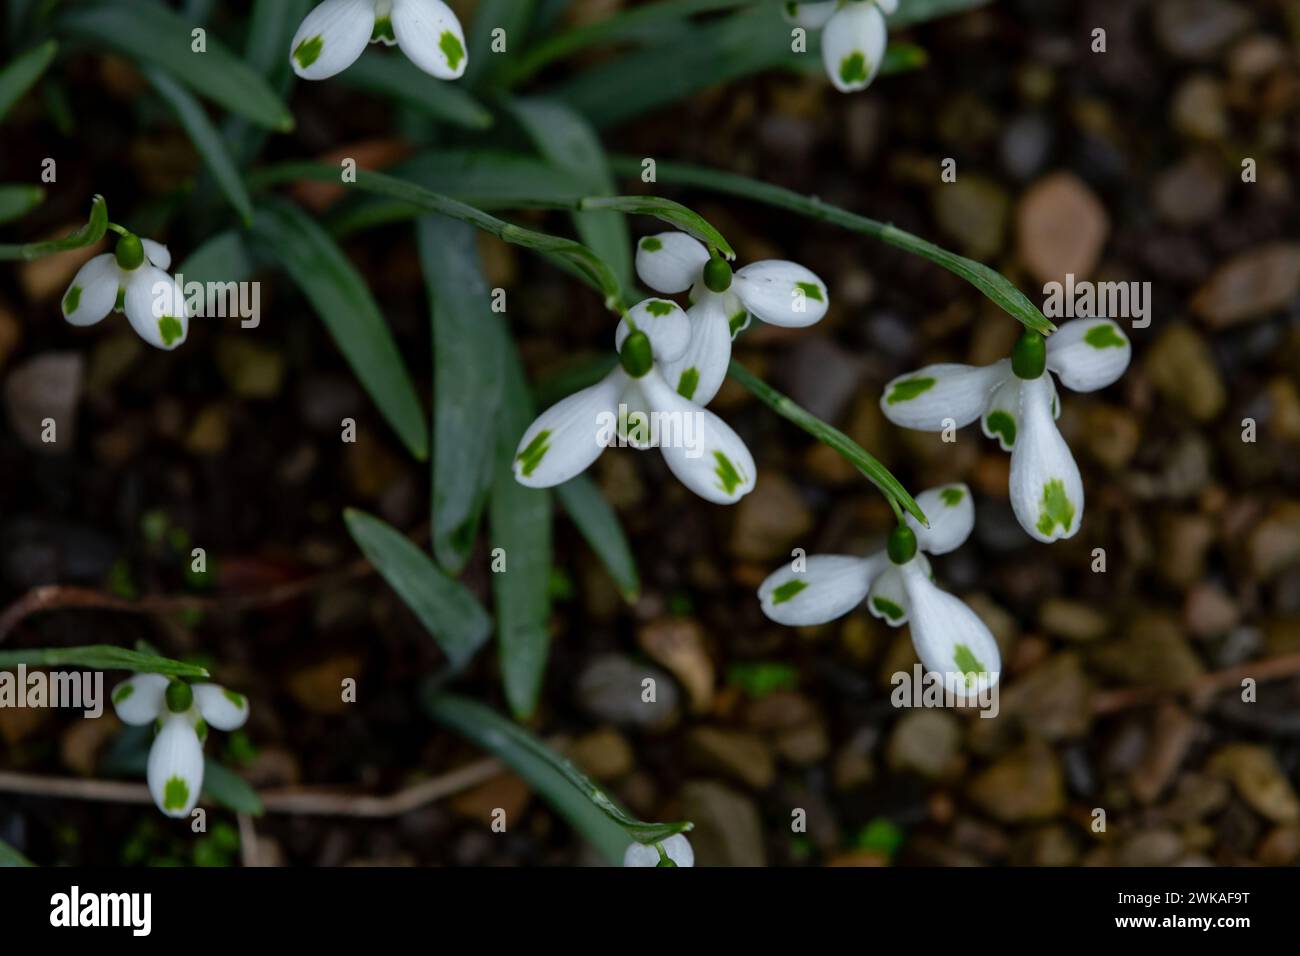 Galanthus plicatus ‘Trymlet - an unusual snowdrop with green markings. Stock Photo